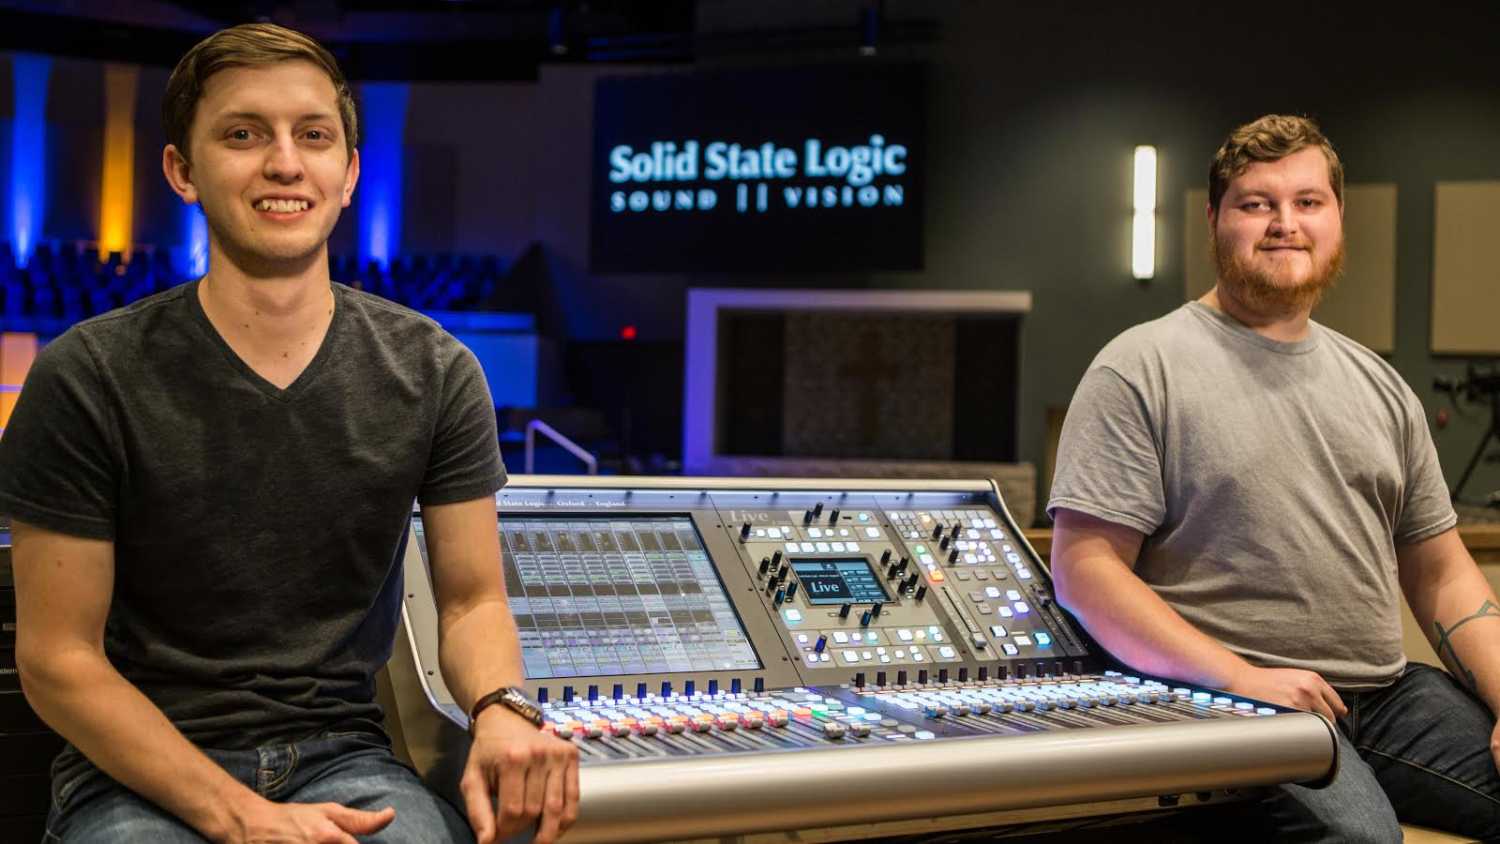 Rusty Trowbridge, technical director (left) and Spencer Wells, AV Technician with one of the new SSL L300 Live consoles